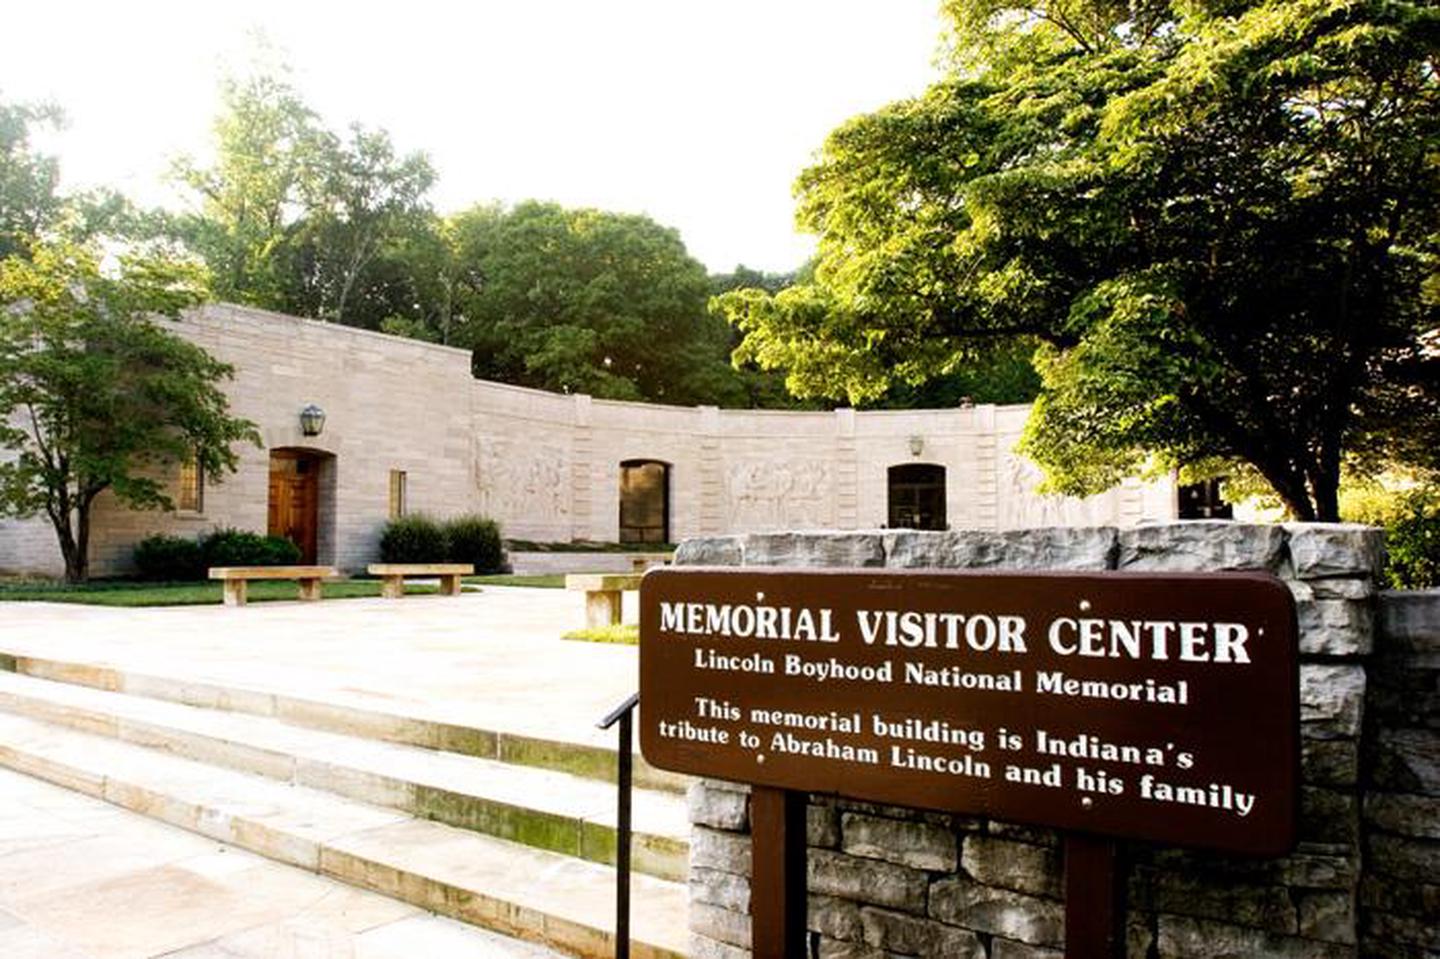 Memorial Visitor CenterMemorial Building contains memorial halls to remember Abraham Lincoln and his family.